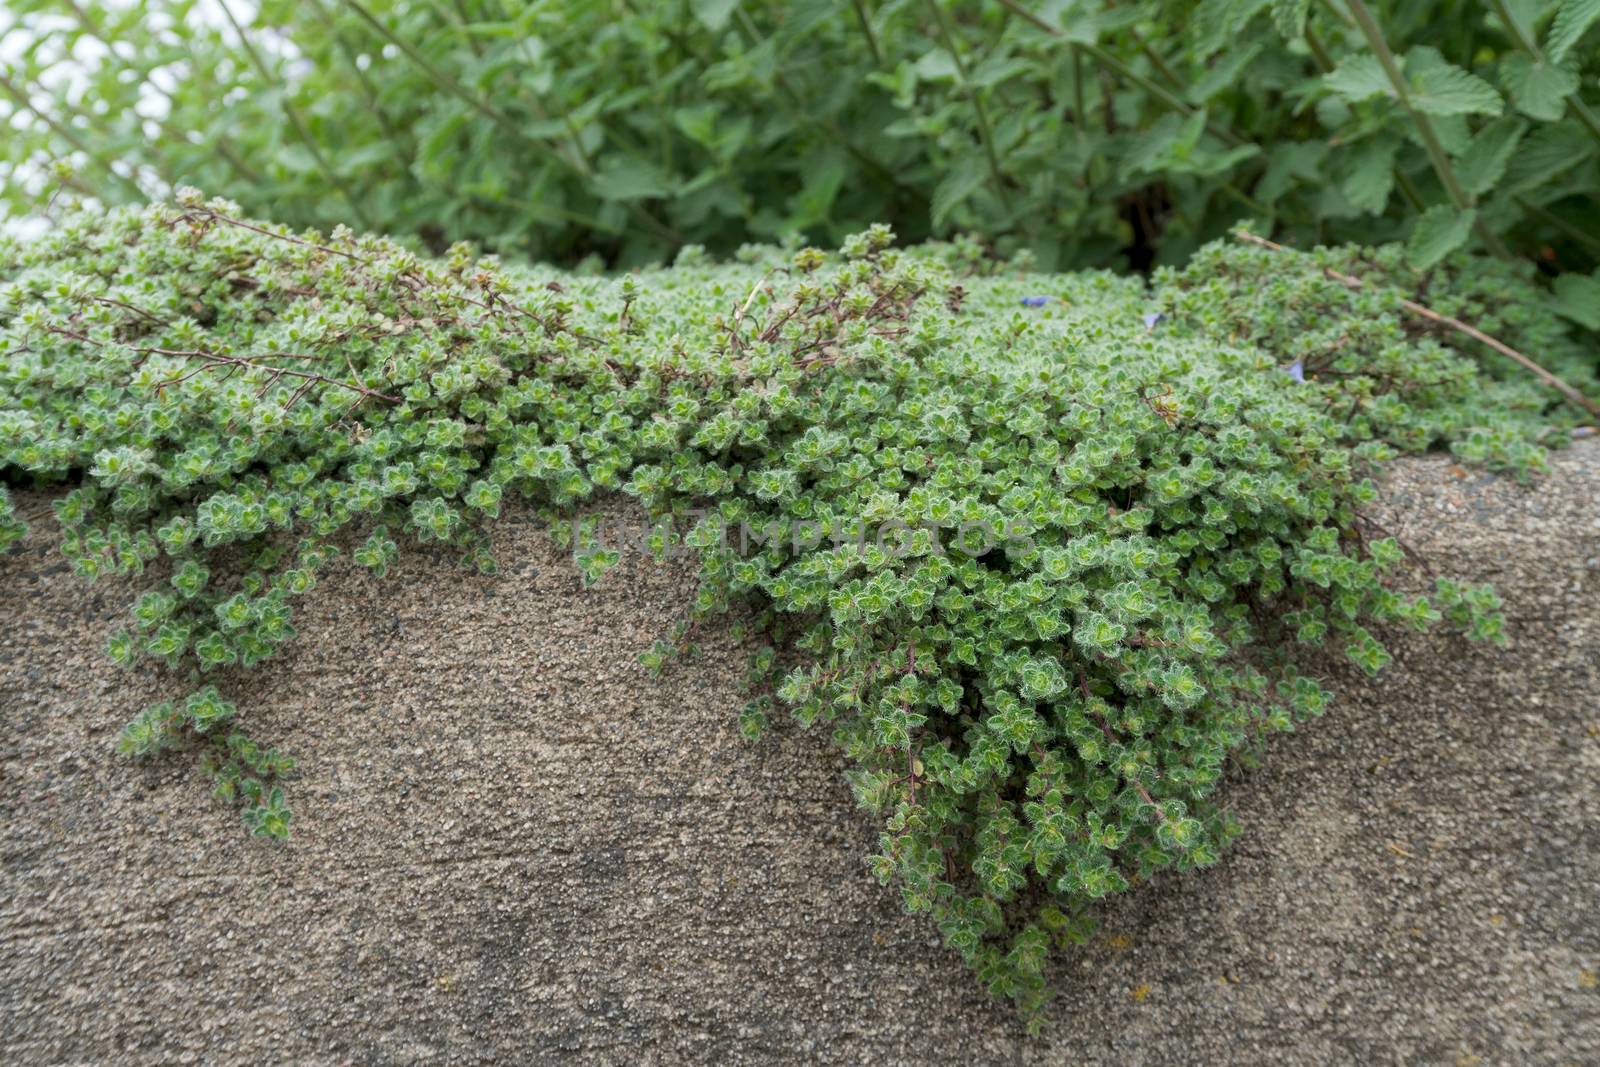 Woolly Thyme creeping over Stone Wall by jpldesigns